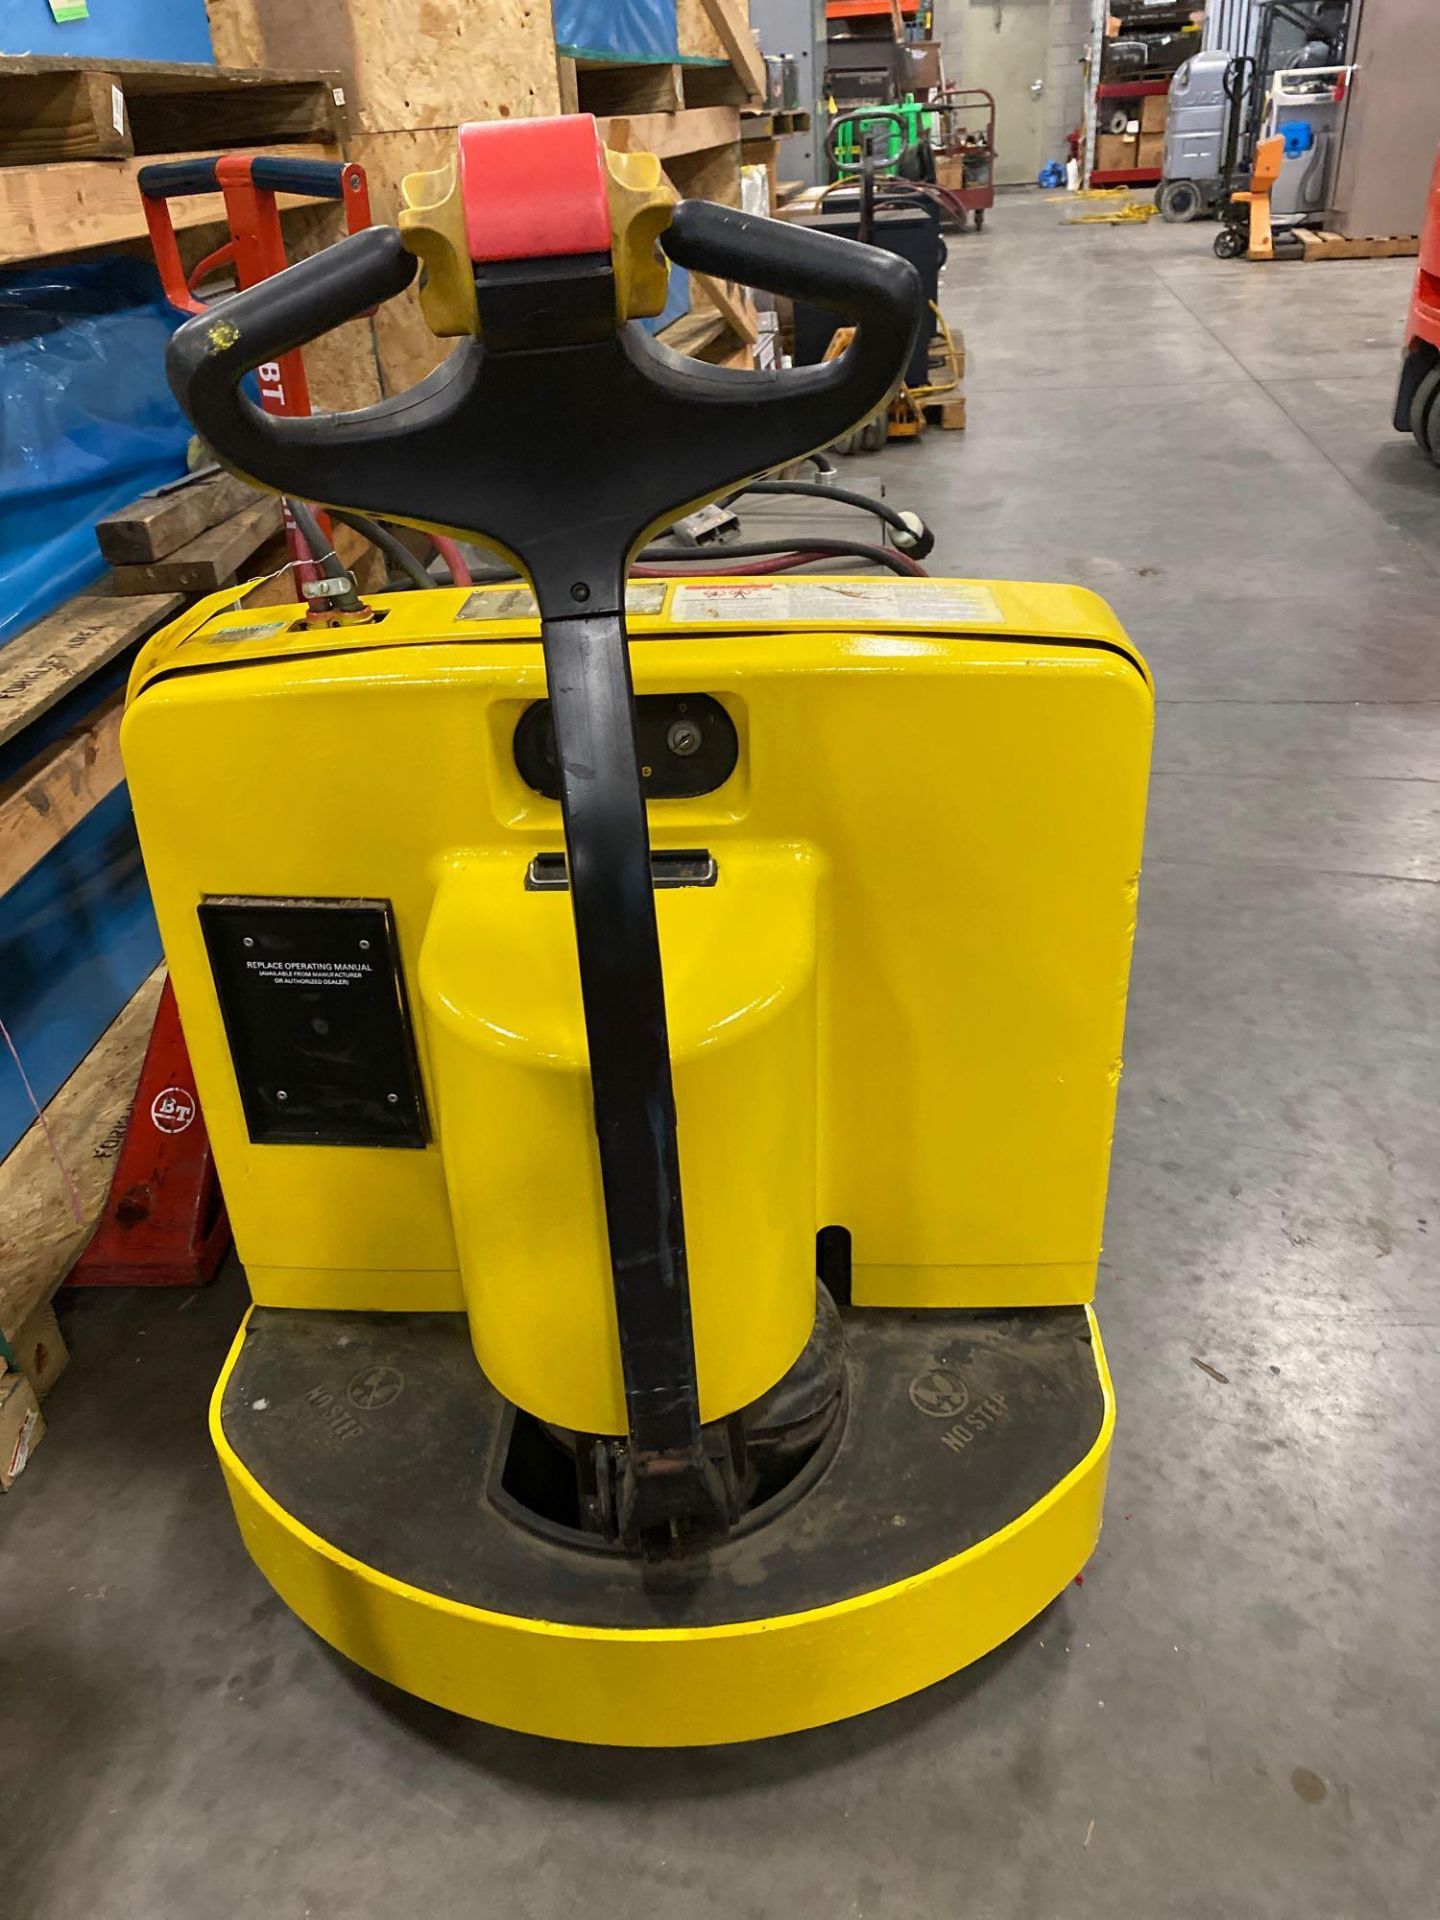 YALE ELECTRIC PALLET JACK MODEL MPW060, 24V, 6,000 LB CAPACITY, 737 HOURS SHOWING, CHARGER INCLUDED, - Image 4 of 5